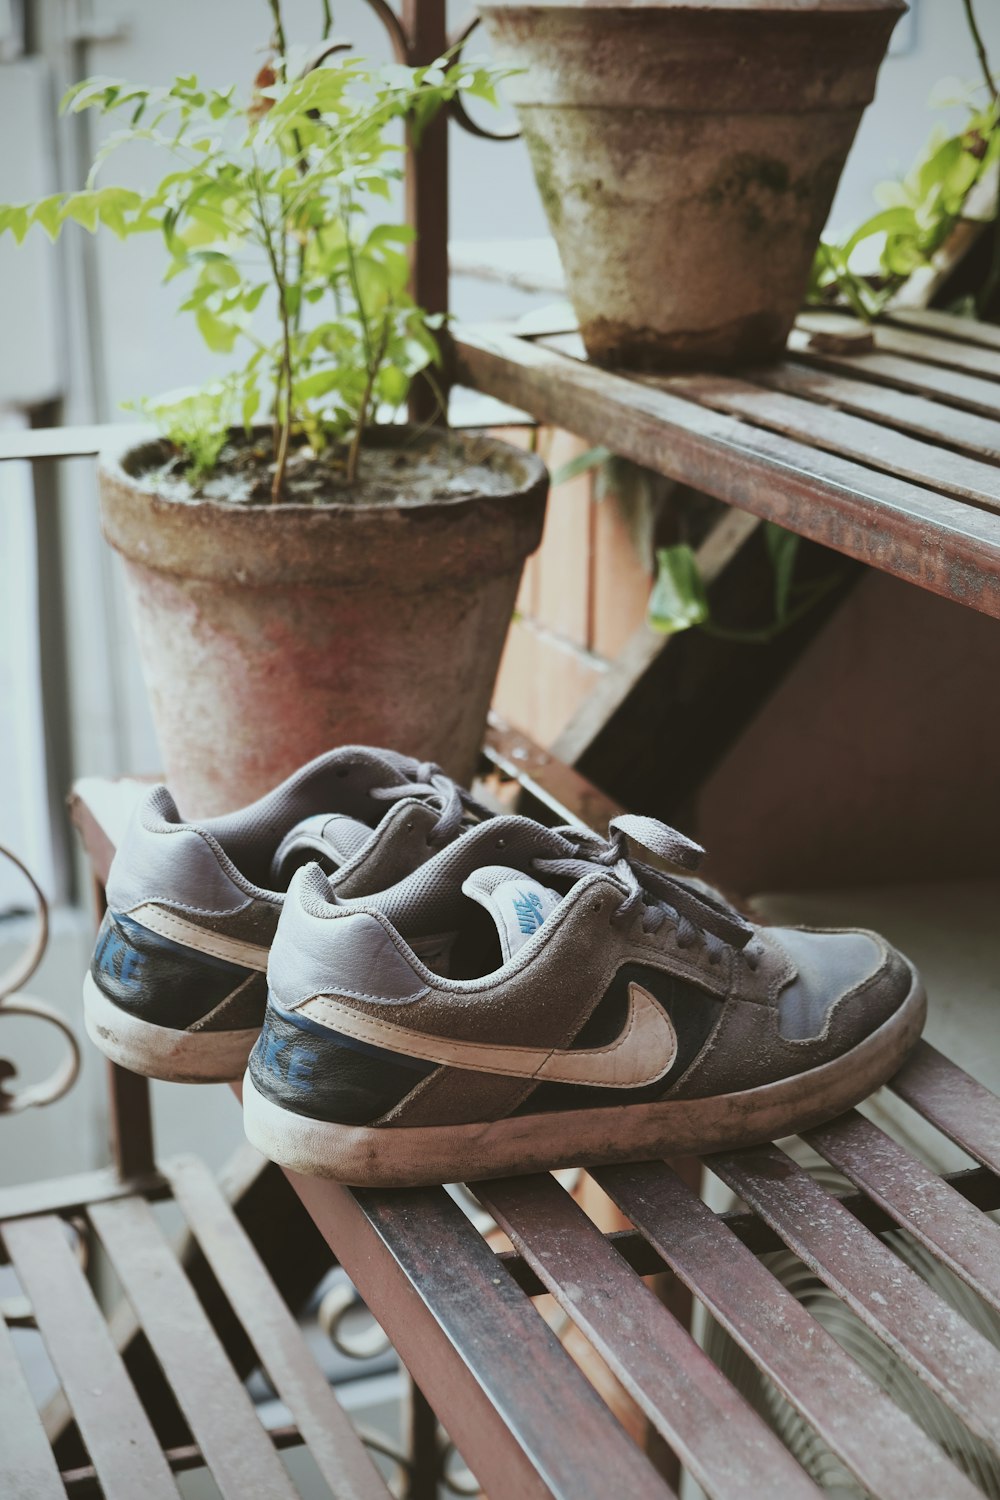 Black and white nike athletic shoes on brown wooden bench photo – Free Vans  Image on Unsplash